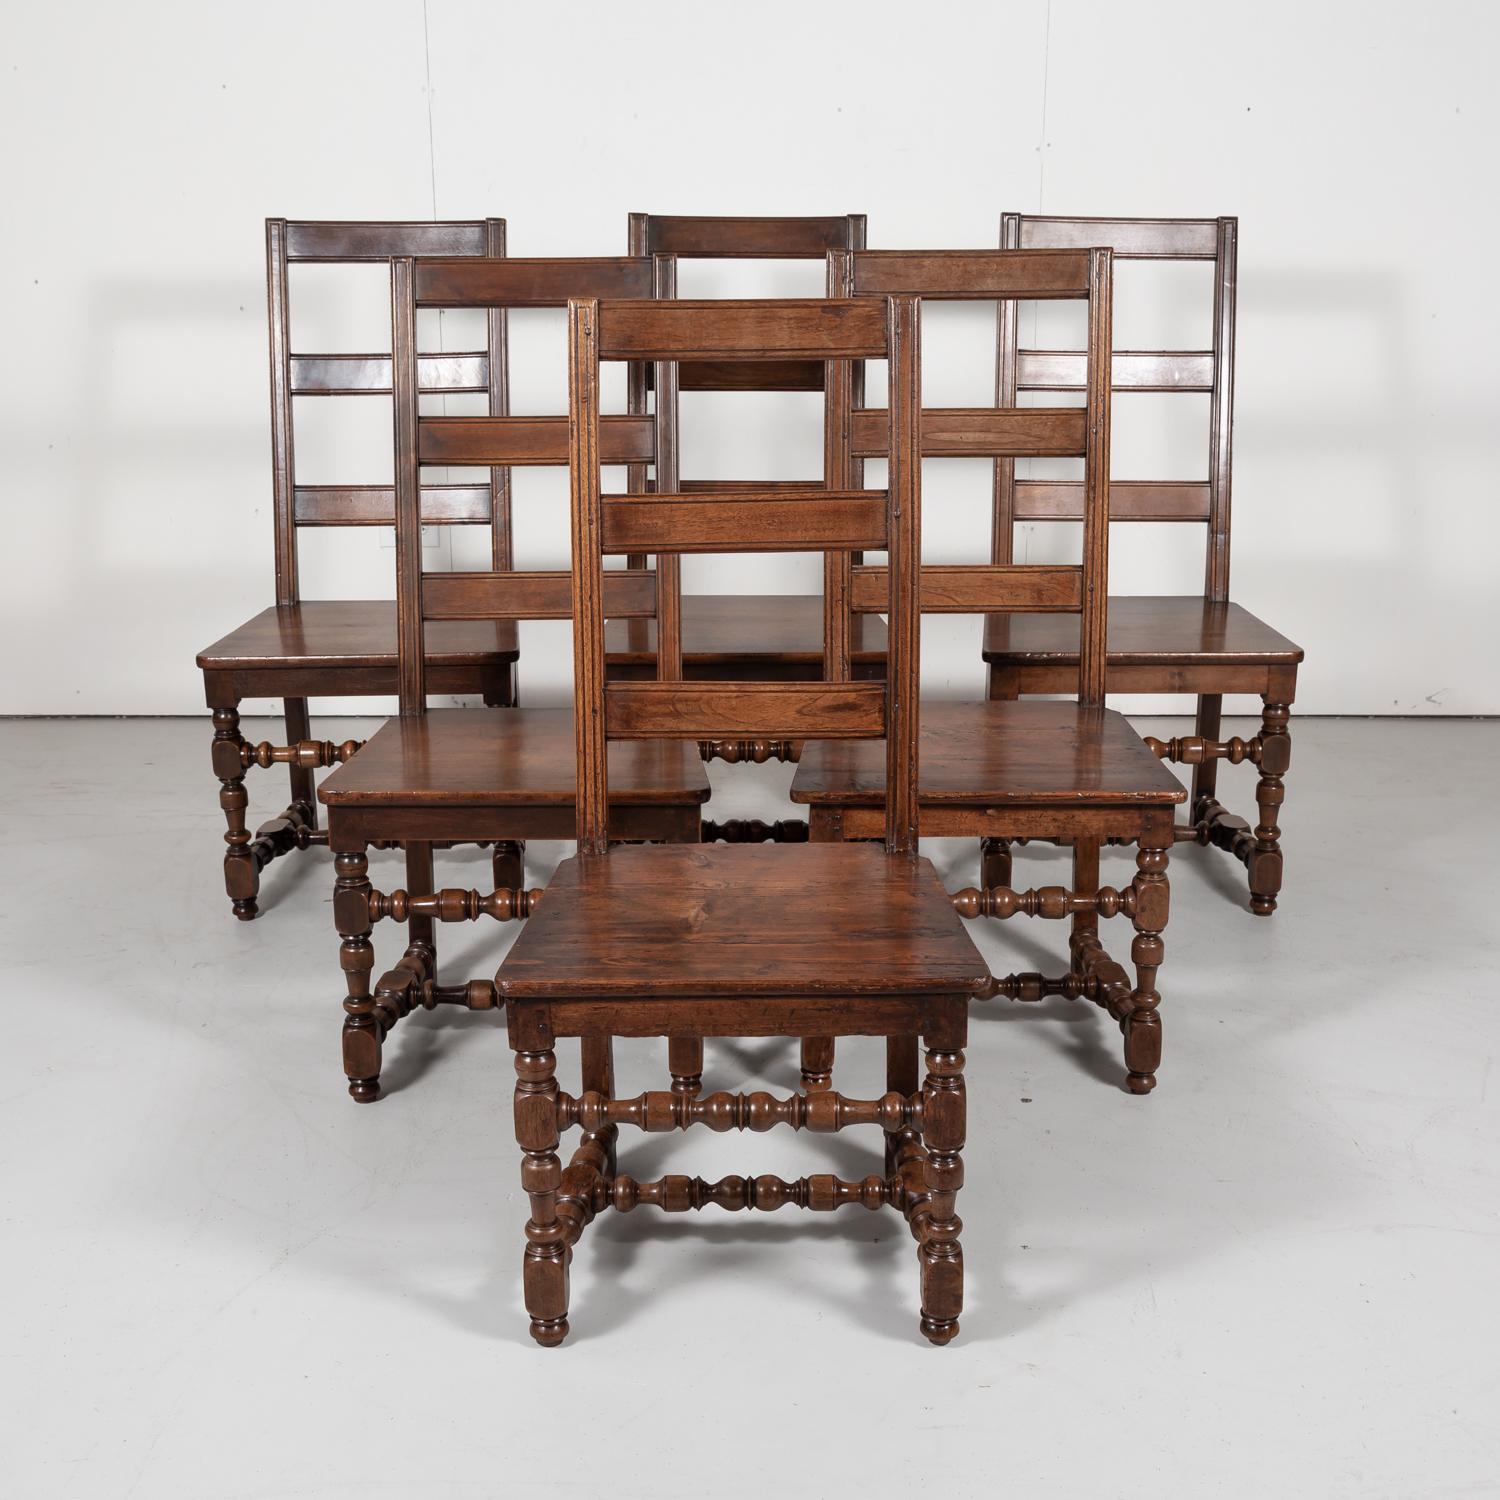 Hard to find set of six French Louis XIV style ladder back dining chairs in walnut, each having a squared back with three horizontal slats and solid wood seat, circa 1890s. Raised on turned front legs and squared back legs with an H-stretcher and